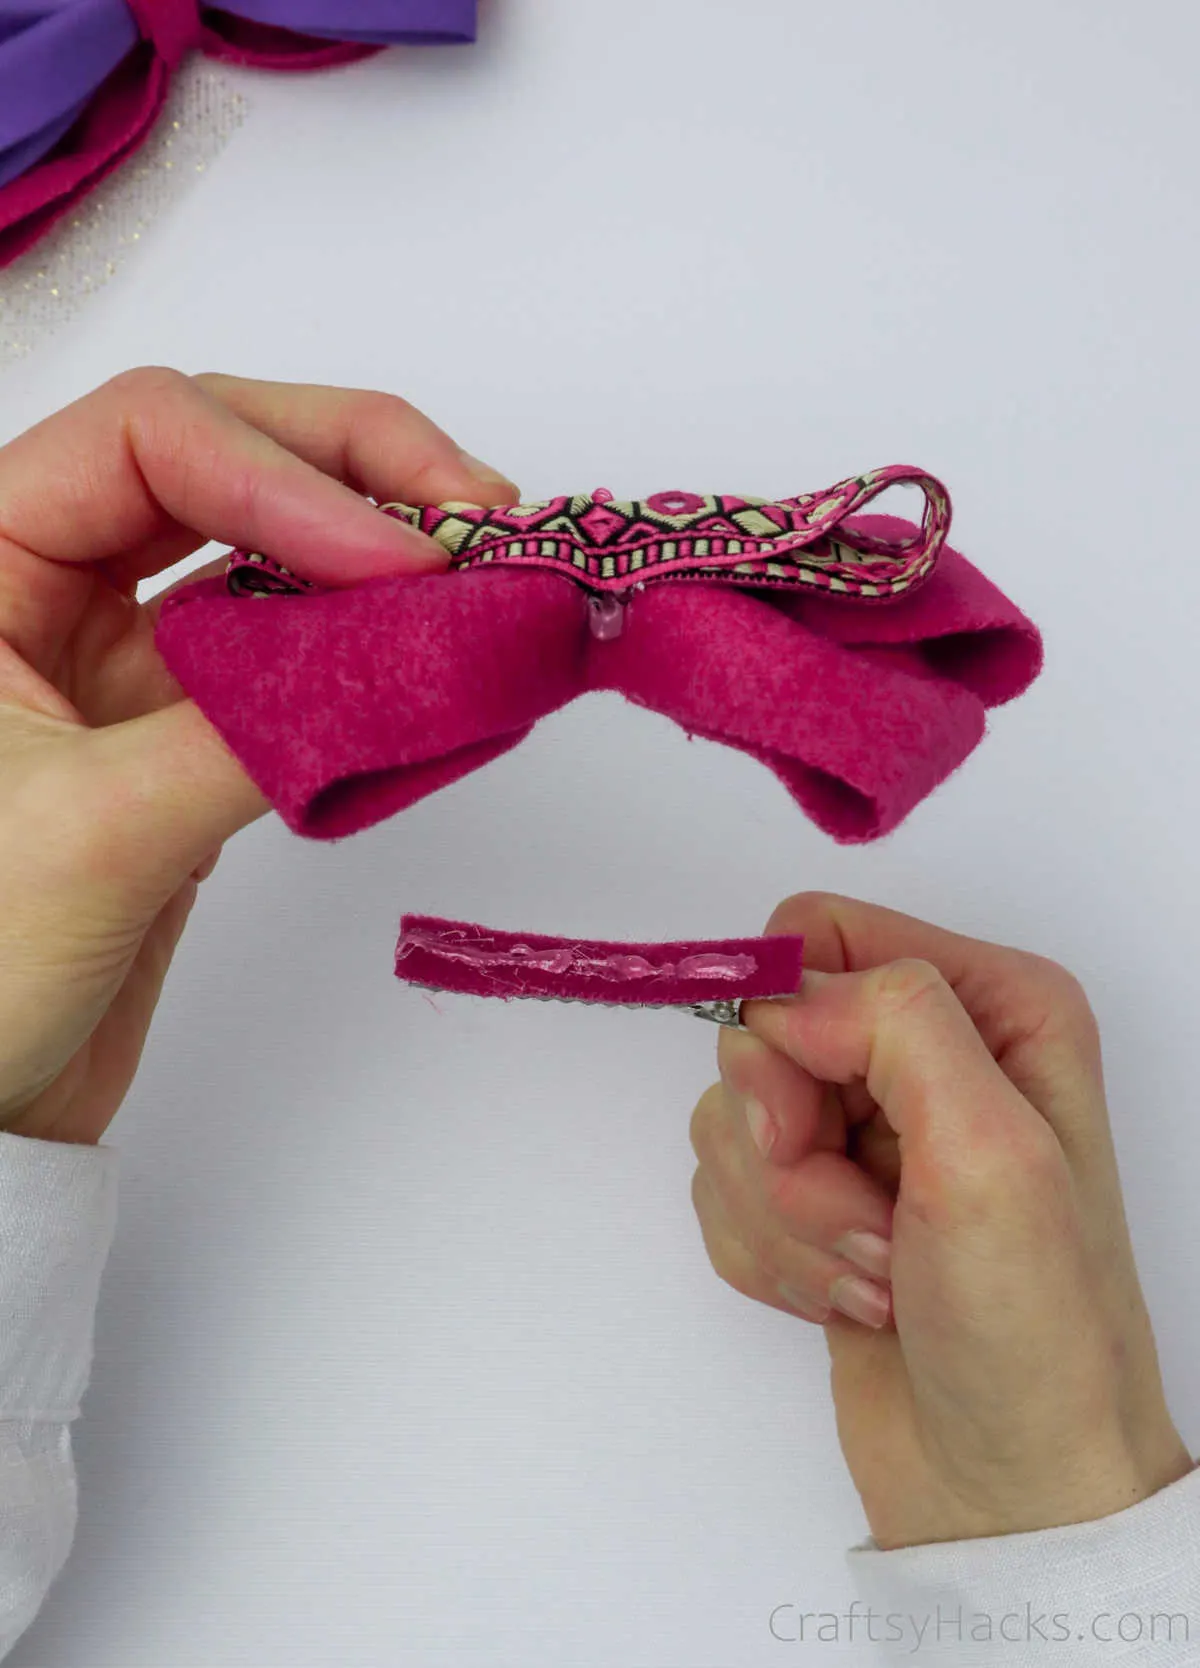 attaching clasp to bow